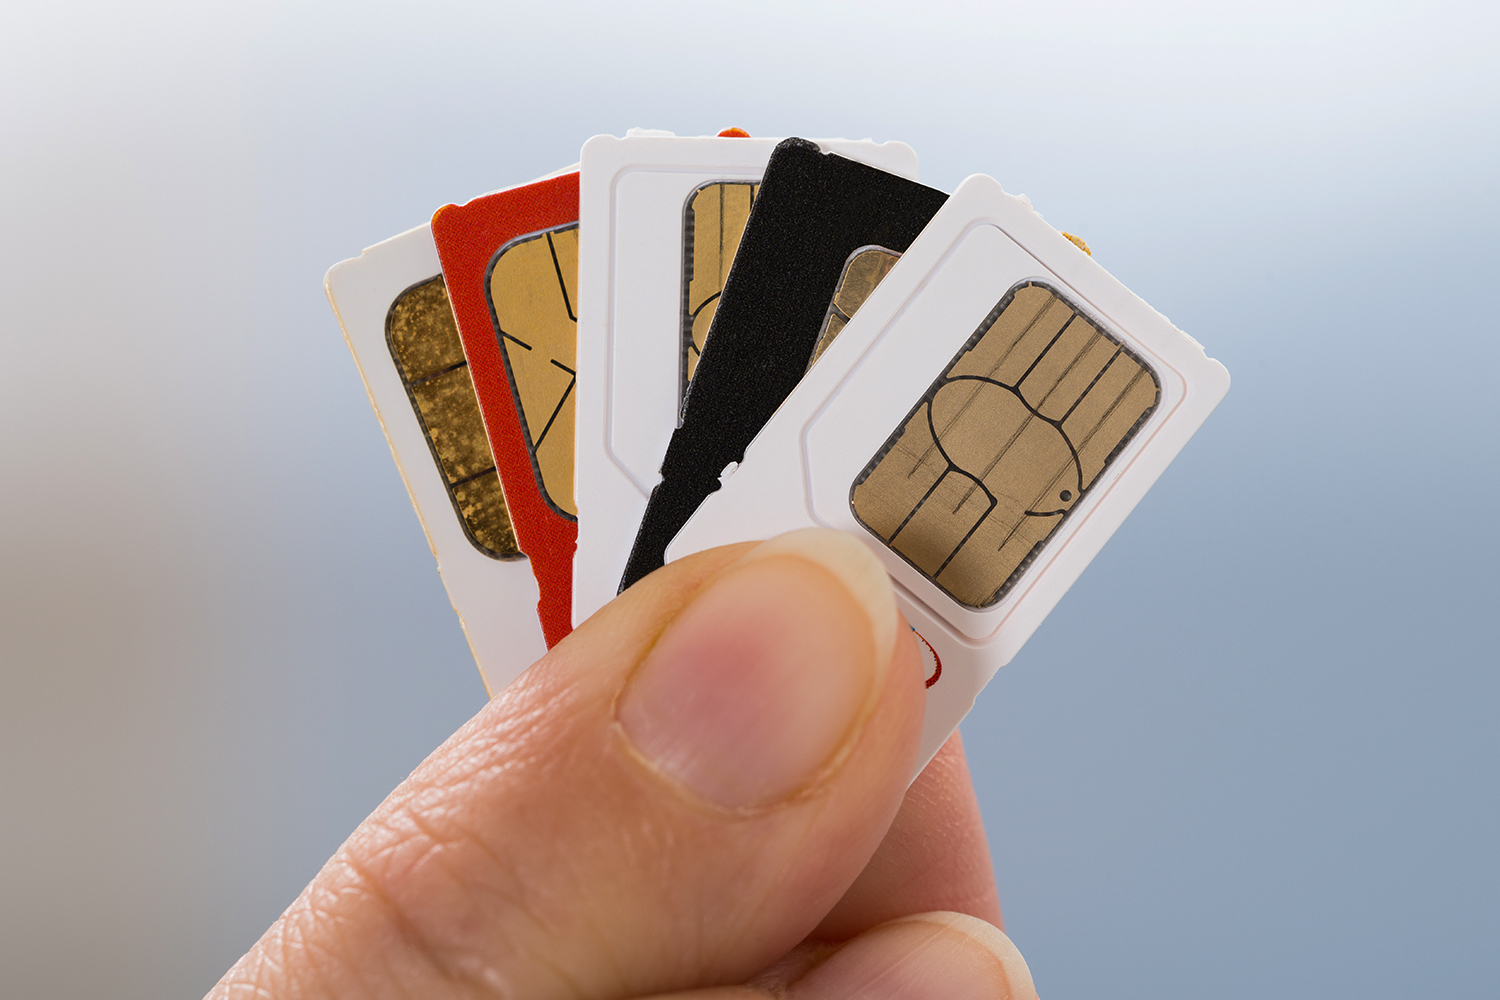 The SIM card in your phone has secret power to make medicine
cheaper